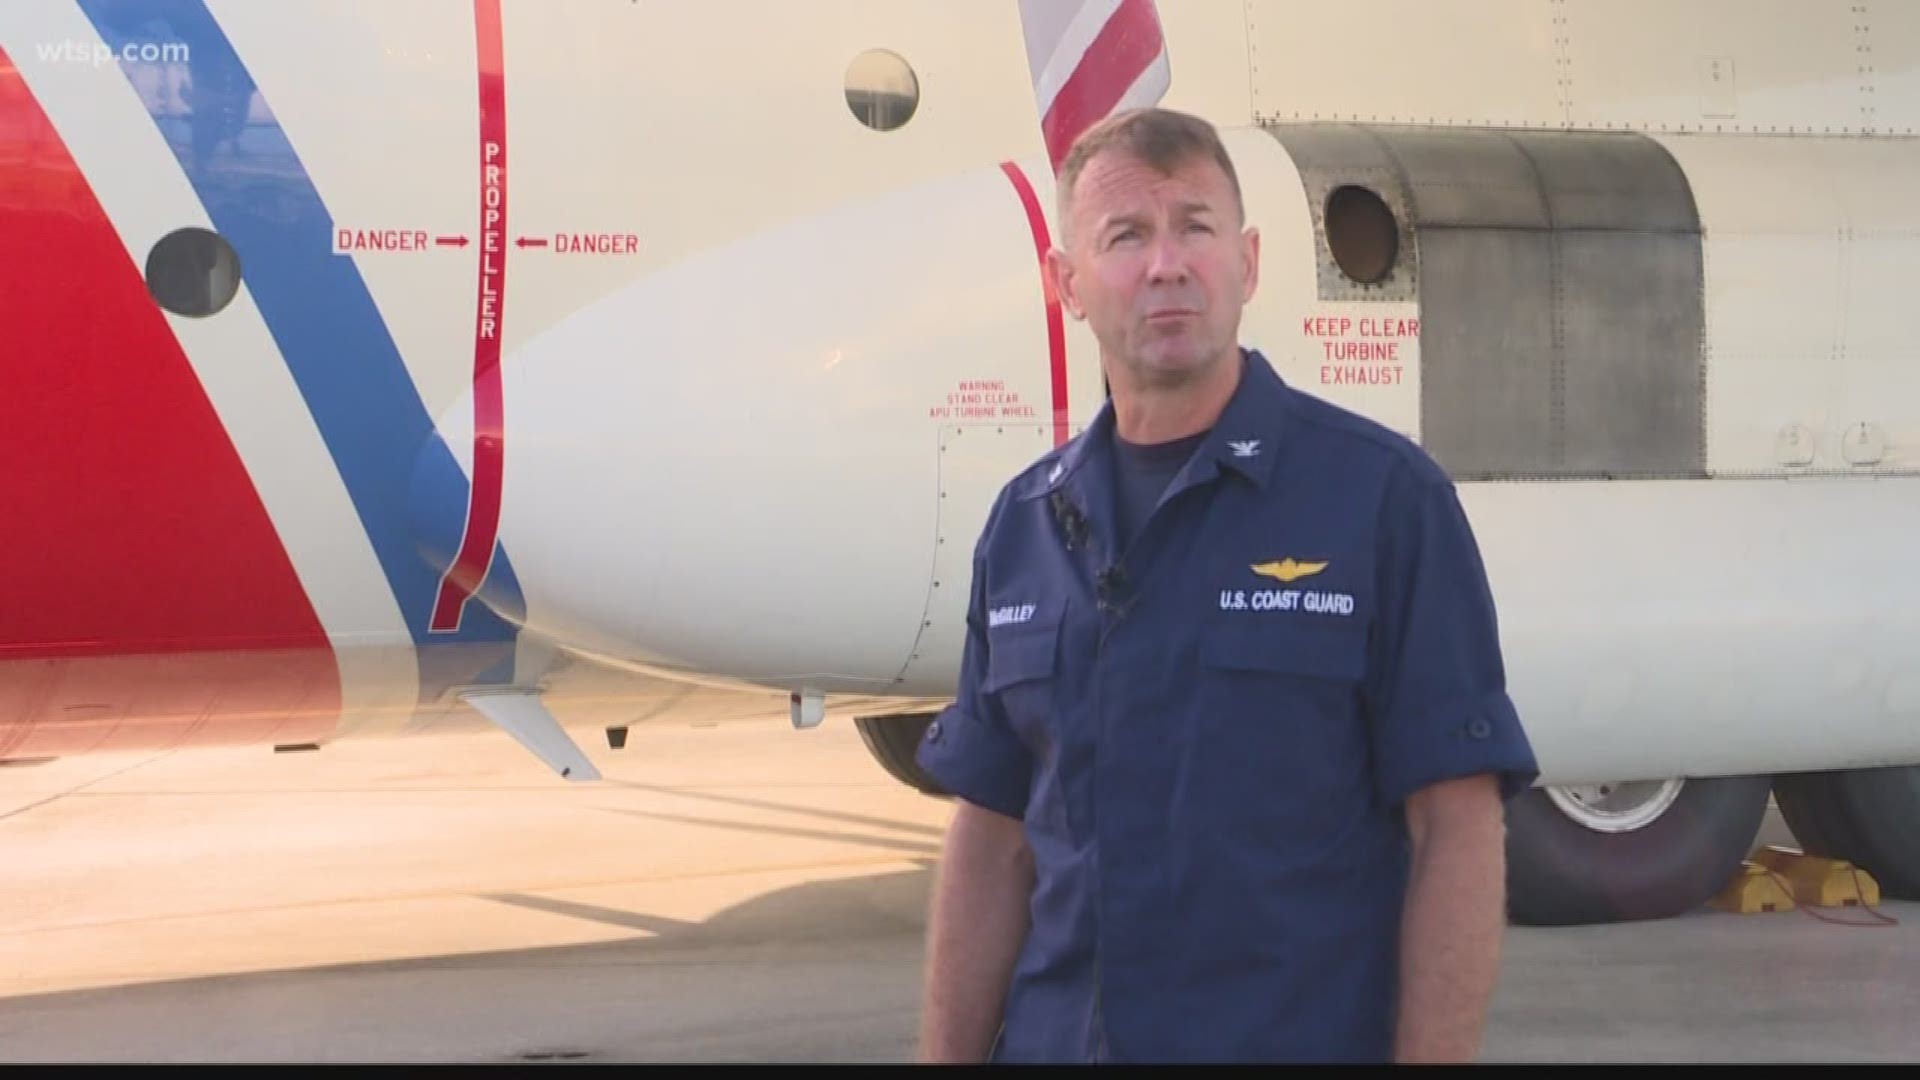 The Clearwater-based Coast Guard rescued at least 19 people from the Bahamas. Tuesday, they sent more rescue crews to help with Dorian recovery efforts. https://on.wtsp.com/2khcebV